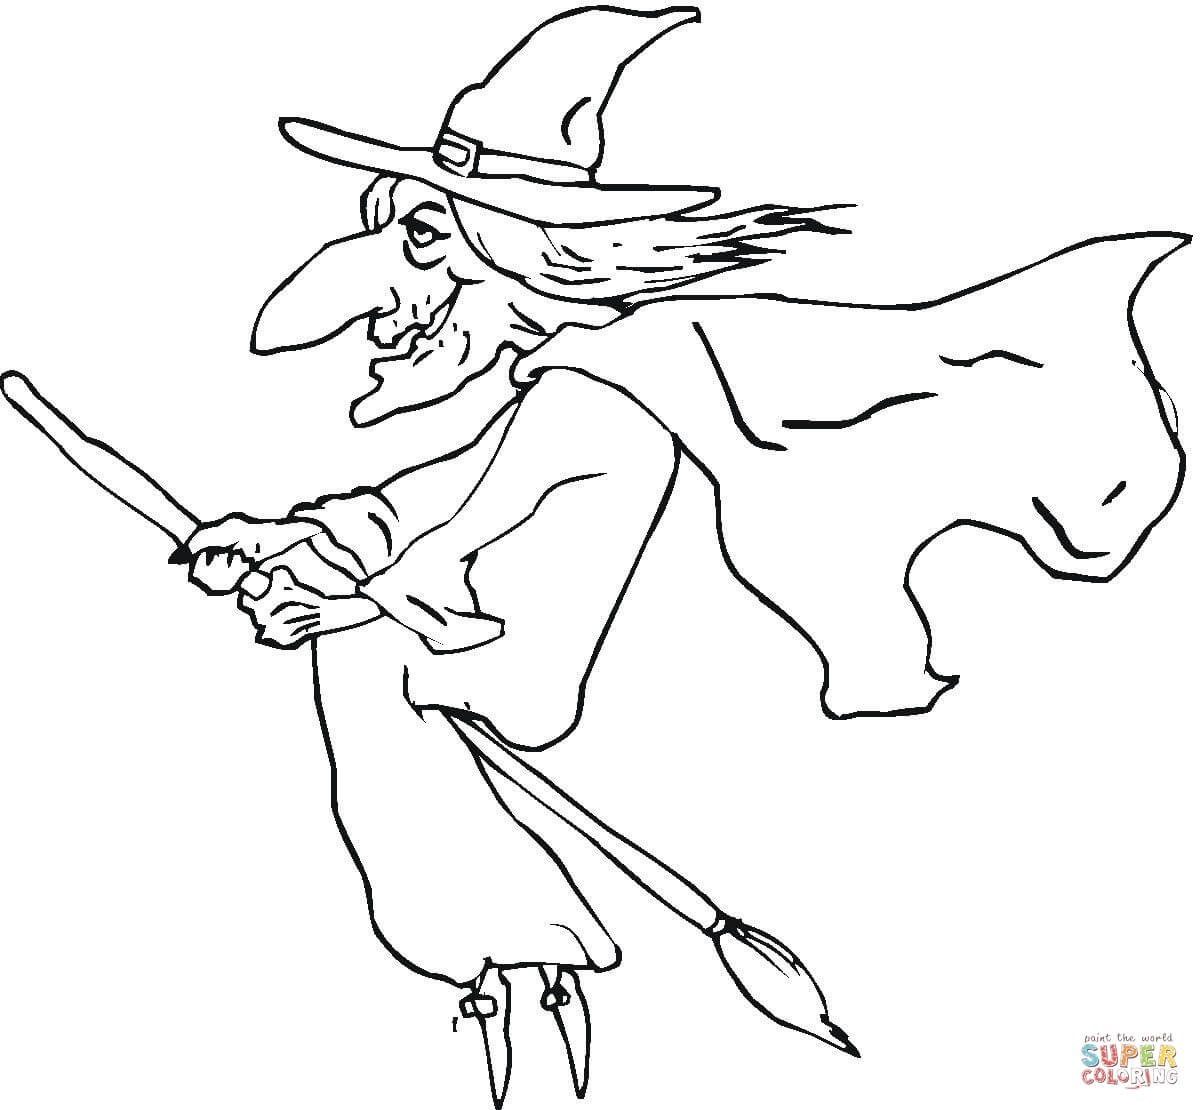 Ugly Old Witch Coloring Page | Free Printable Coloring Pages - Free Printable Pictures Of Witches